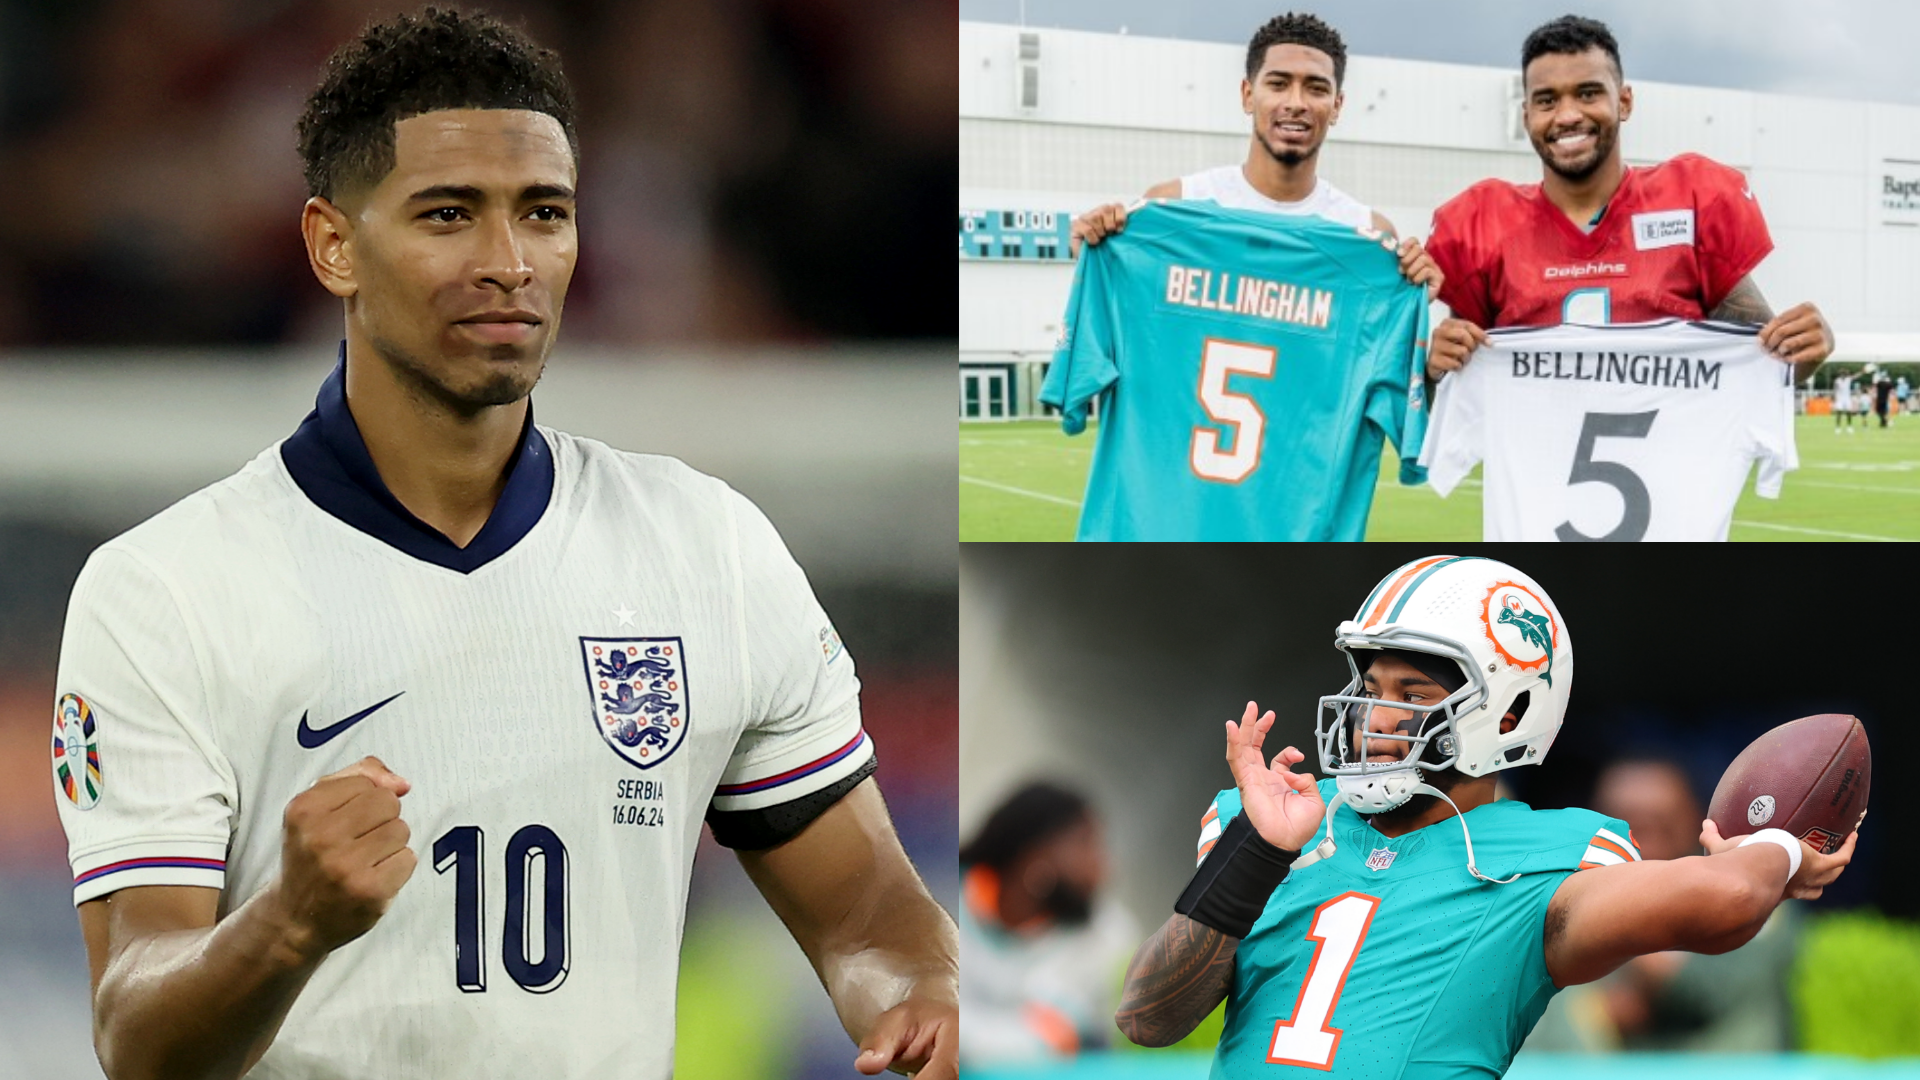 VIDEO: Jude Bellingham swaps jerseys with Tua Tagovailoa during visit to Miami Dolphins training complex as NFL star reveals he's a 'big fan' of Real Madrid & England sensation | Goal.com